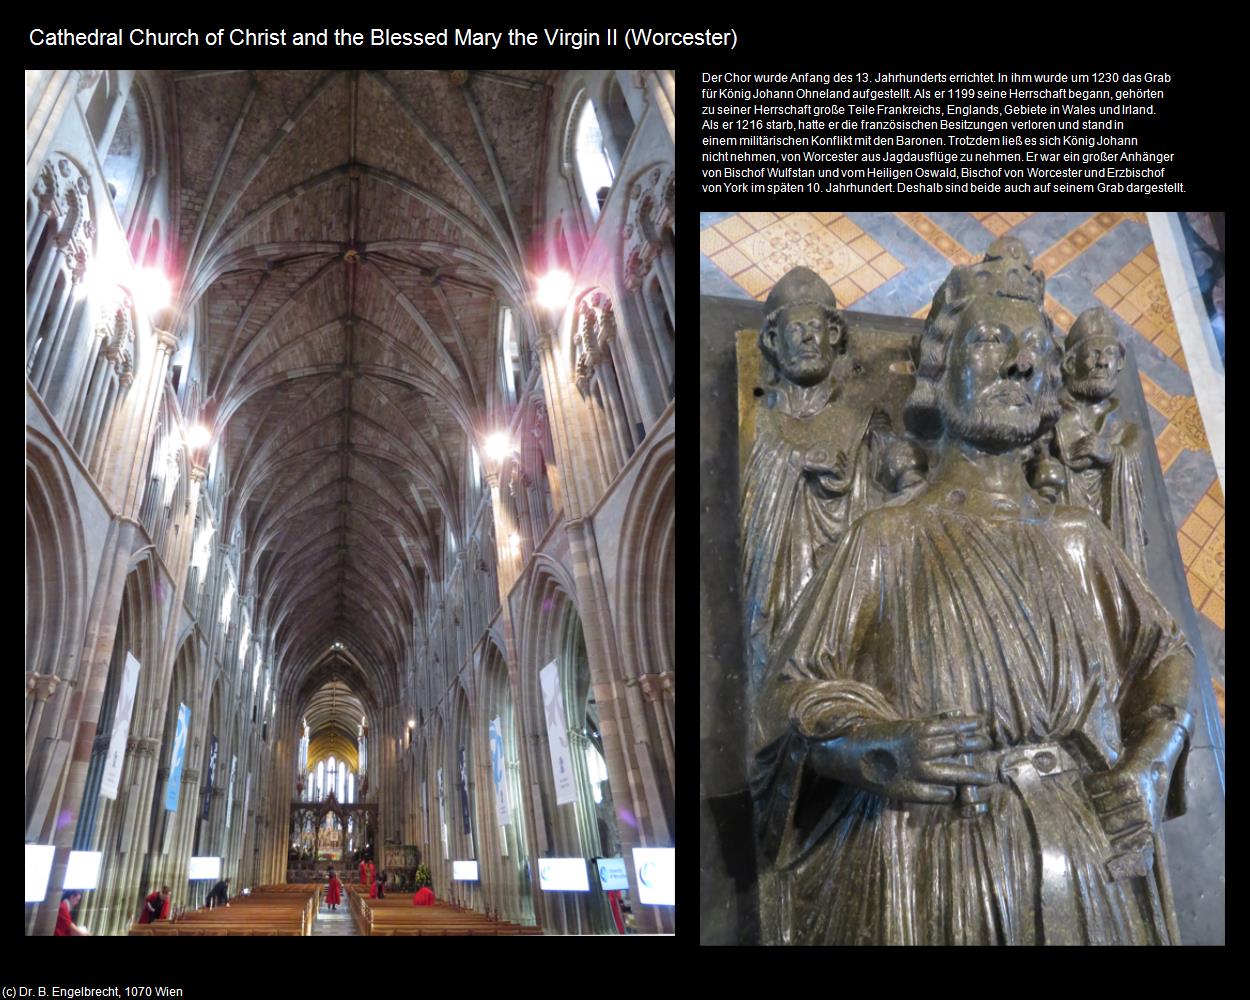 Cathedral Church of Christ and the Blessed Mary the Virgin II (Worcester, England) in Kulturatlas-ENGLAND und WALES